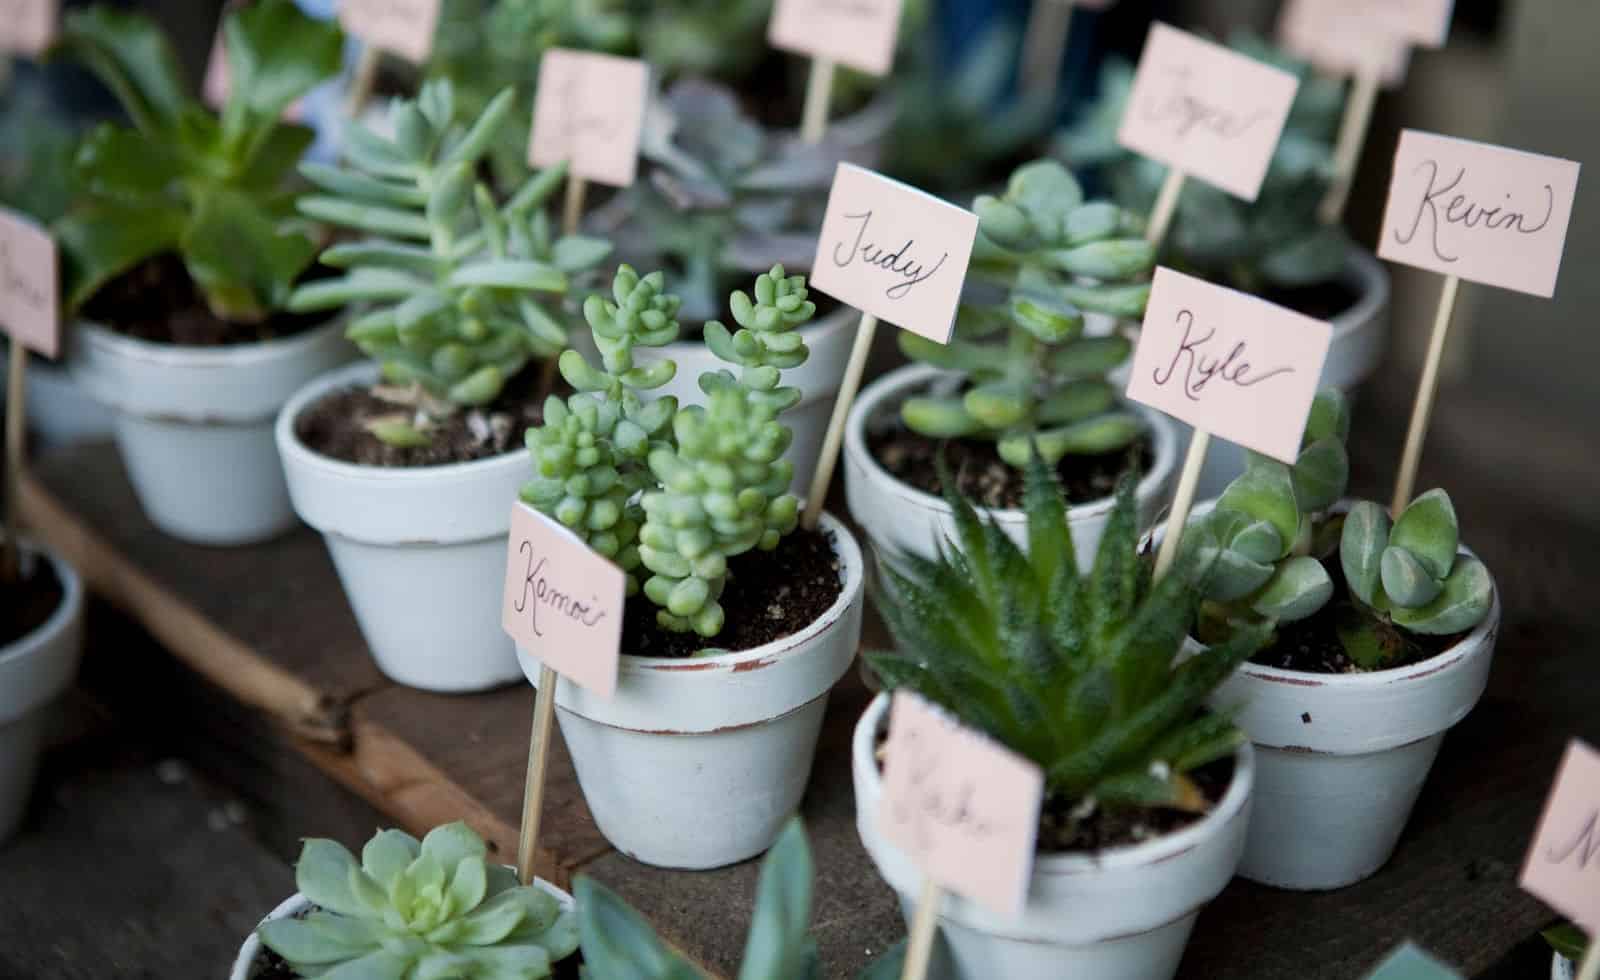 A variety of succulent wedding favors with name tags.